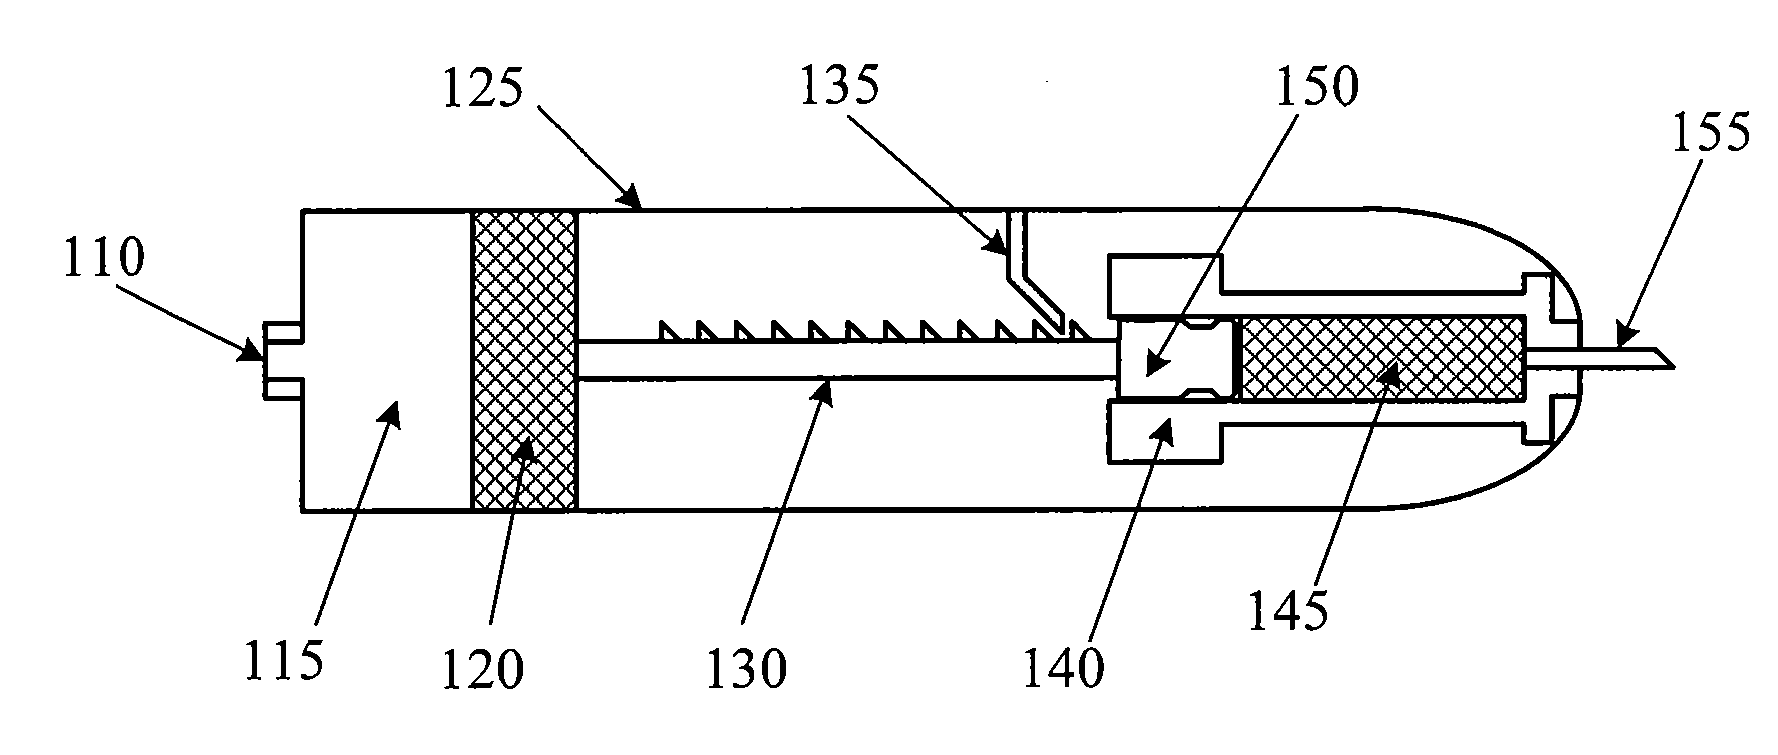 Pneumatically-Powered Intraocular Lens Injection Device with Removable Cartridge